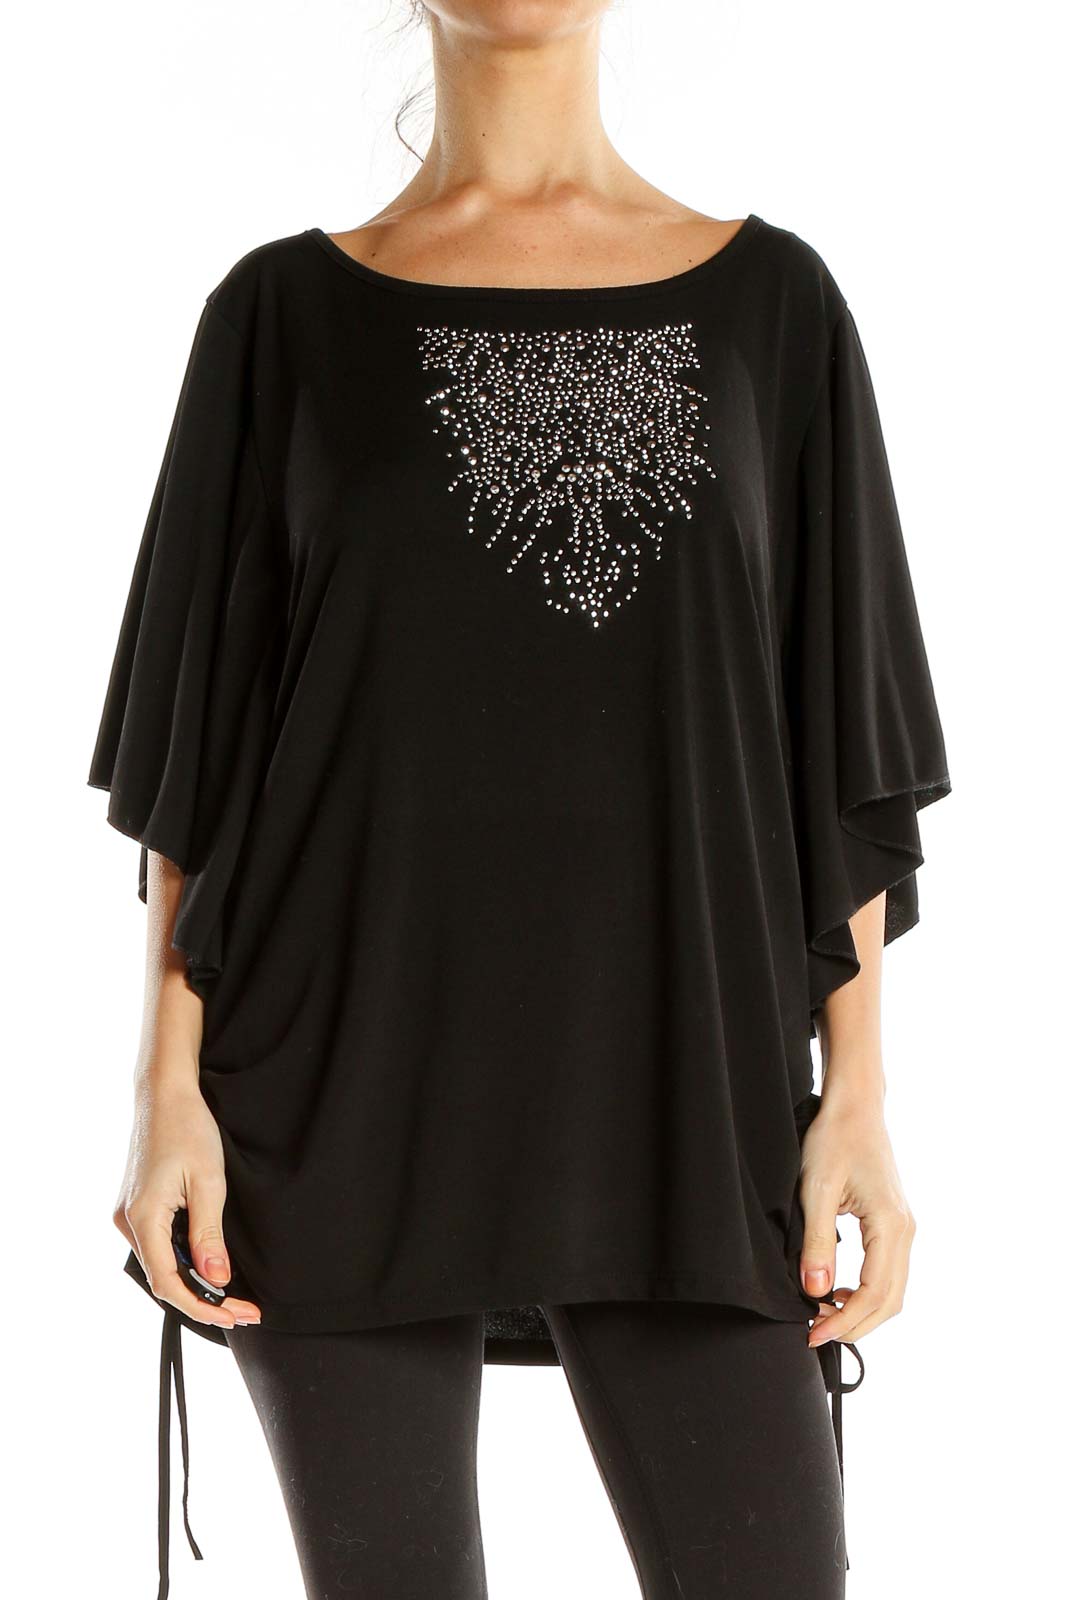 Black Blouse With Sequin Detail Front